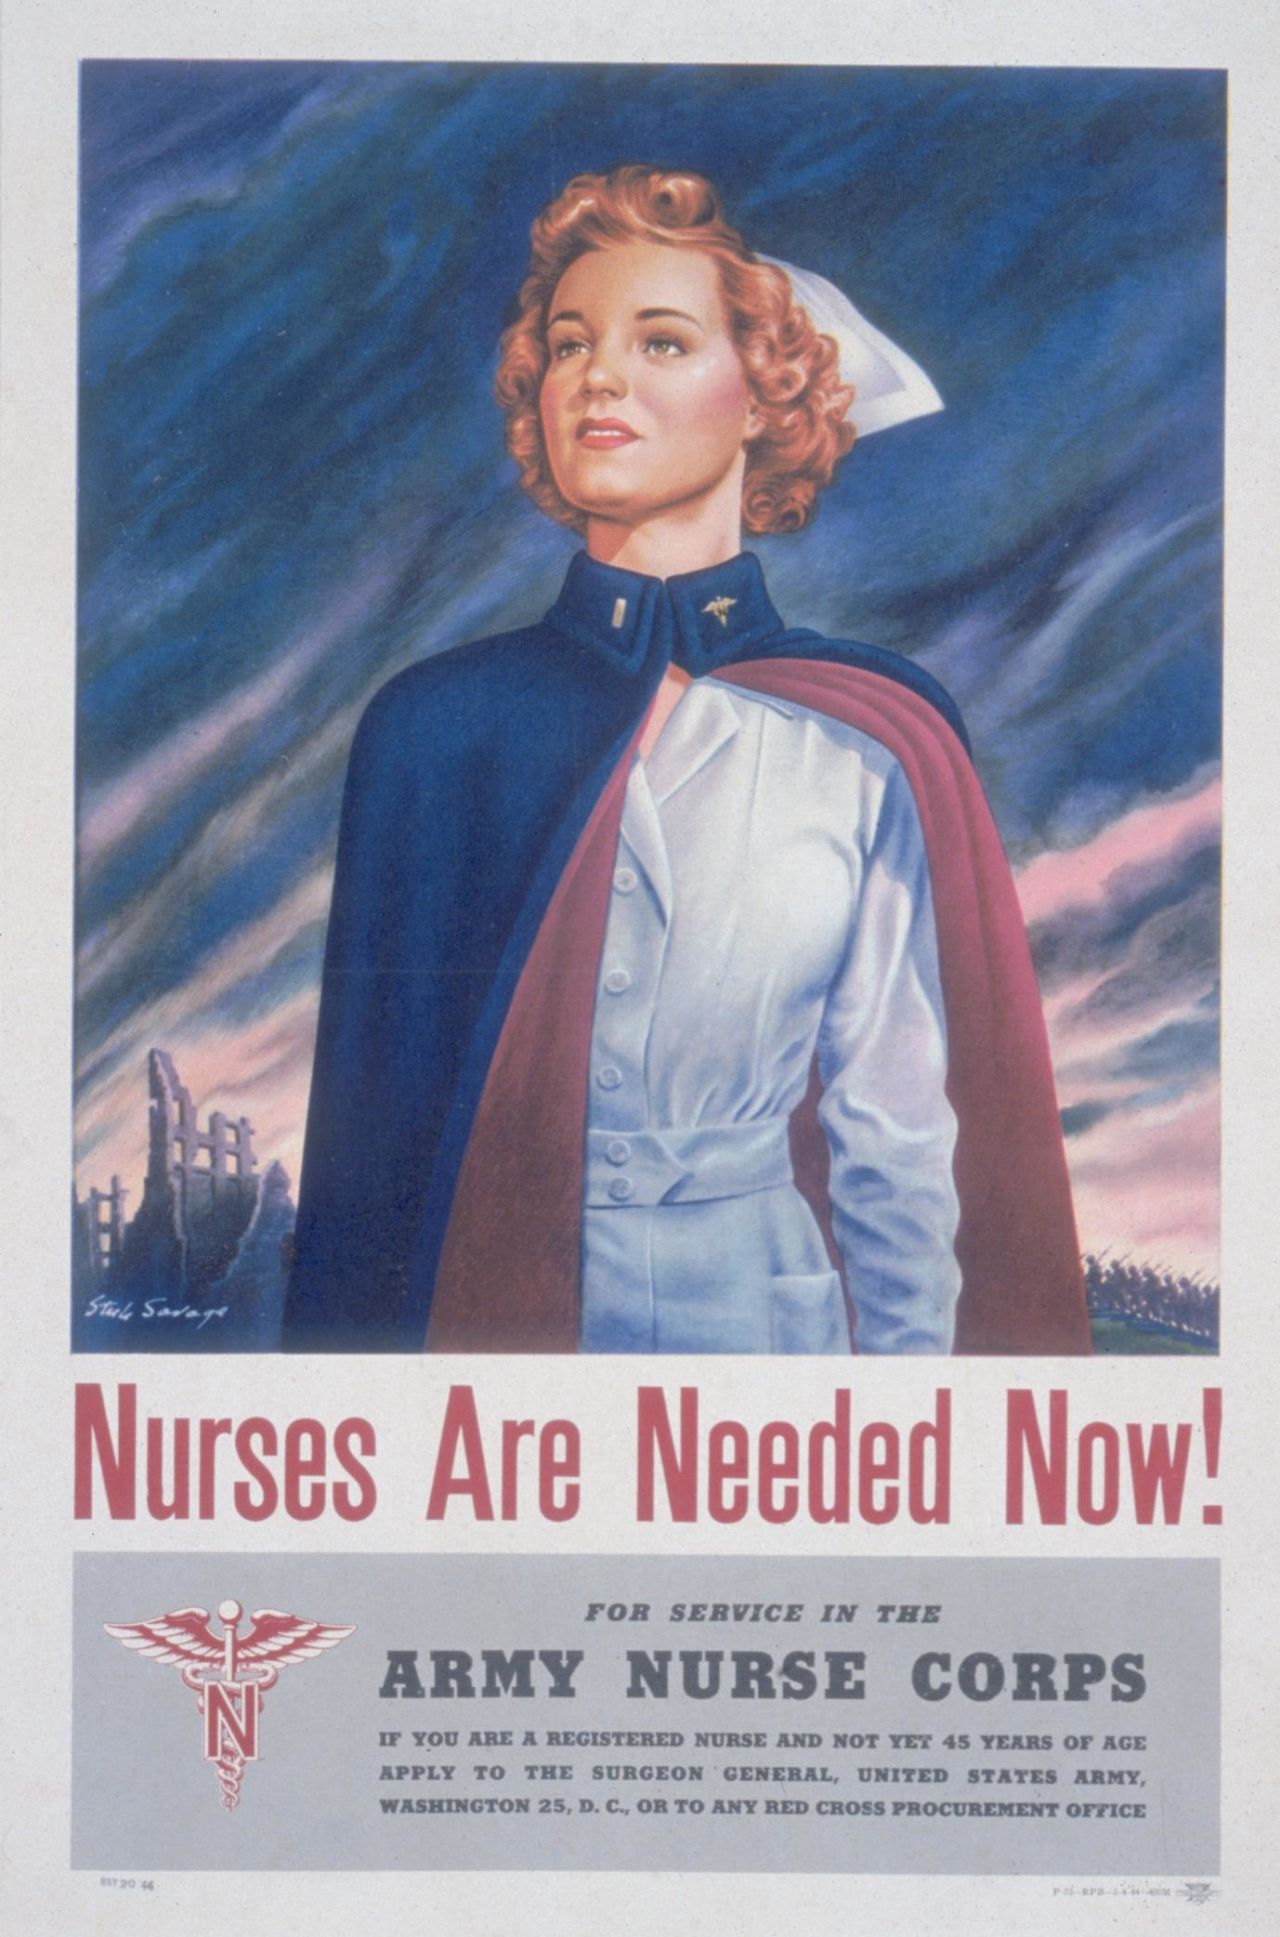 US Army Nurse Corps recruiting poster (early to mid 1940s)